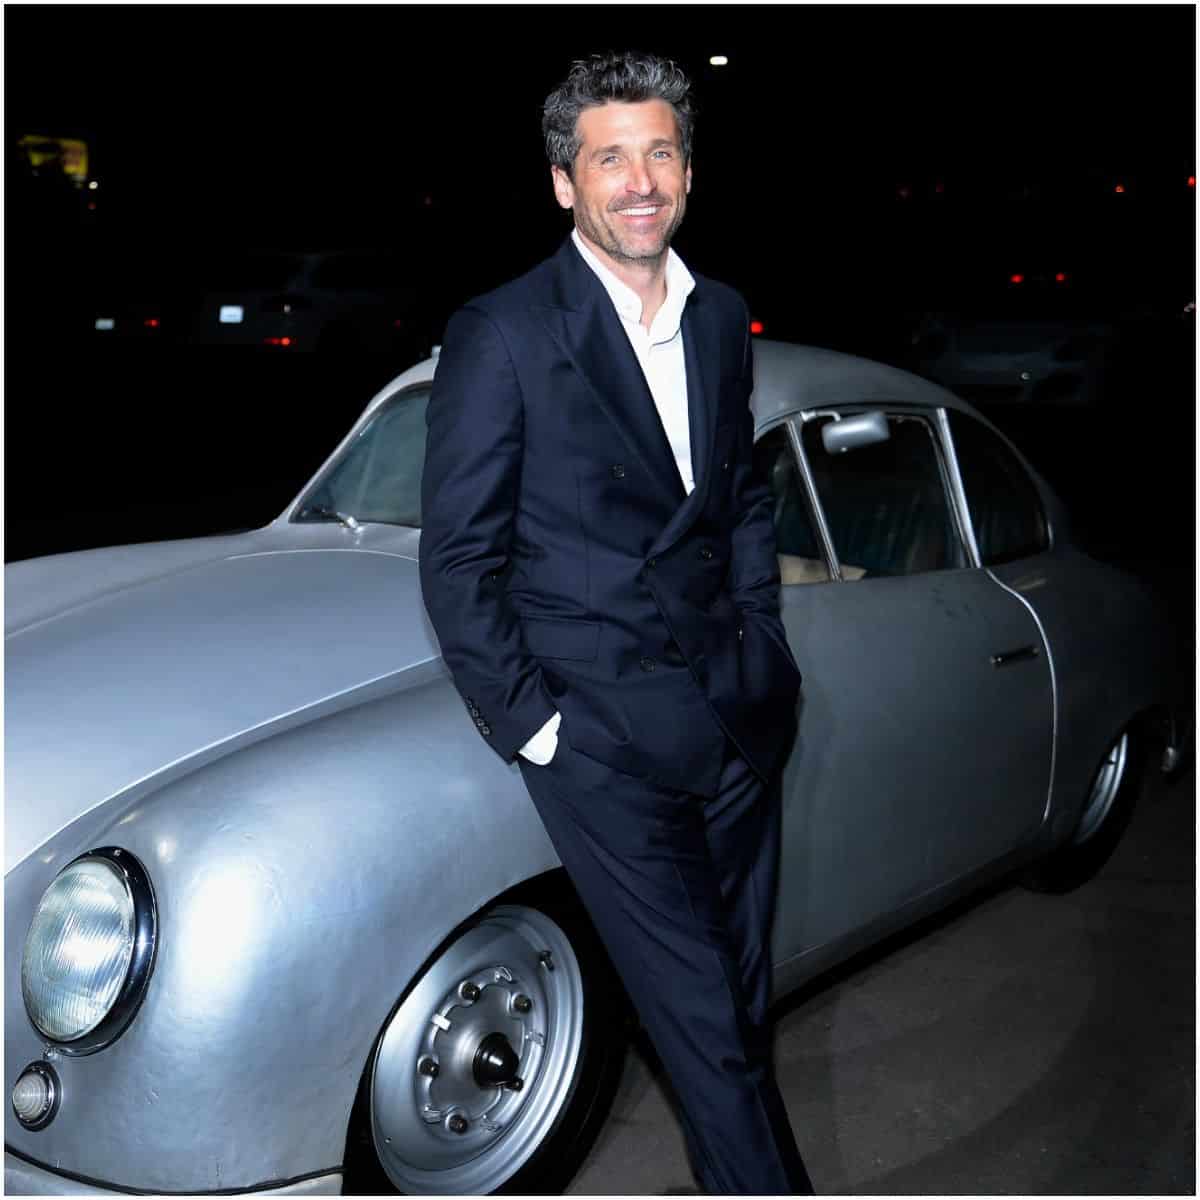 Why did Patrick Dempsey leave Grey's Anatomy